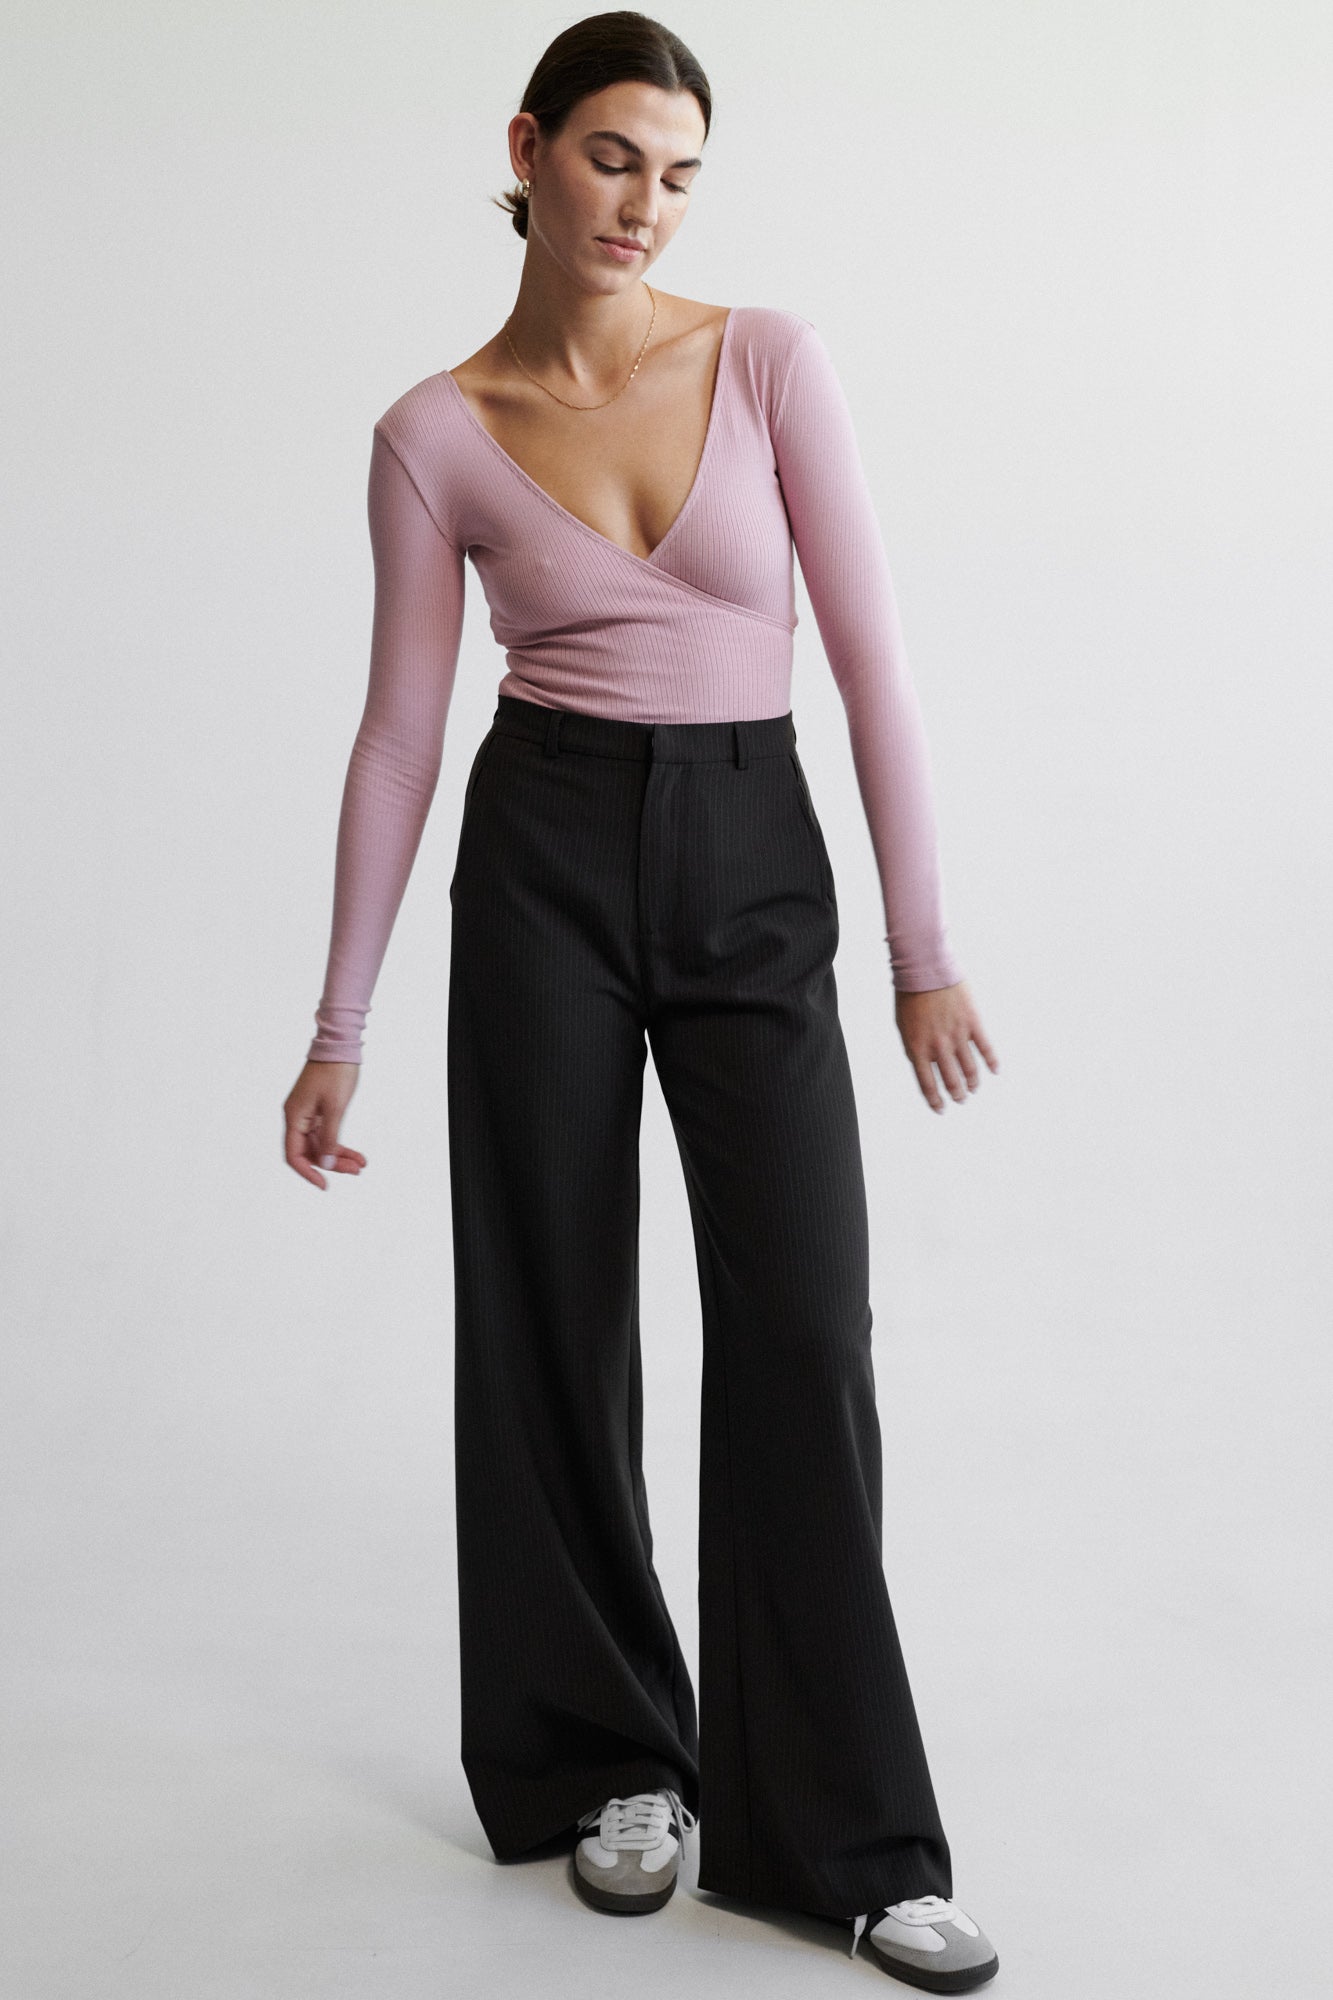 Bodysuit in organic cotton / 01 / 06 / peony pink ?The model is 178 cm tall and wears size XS?